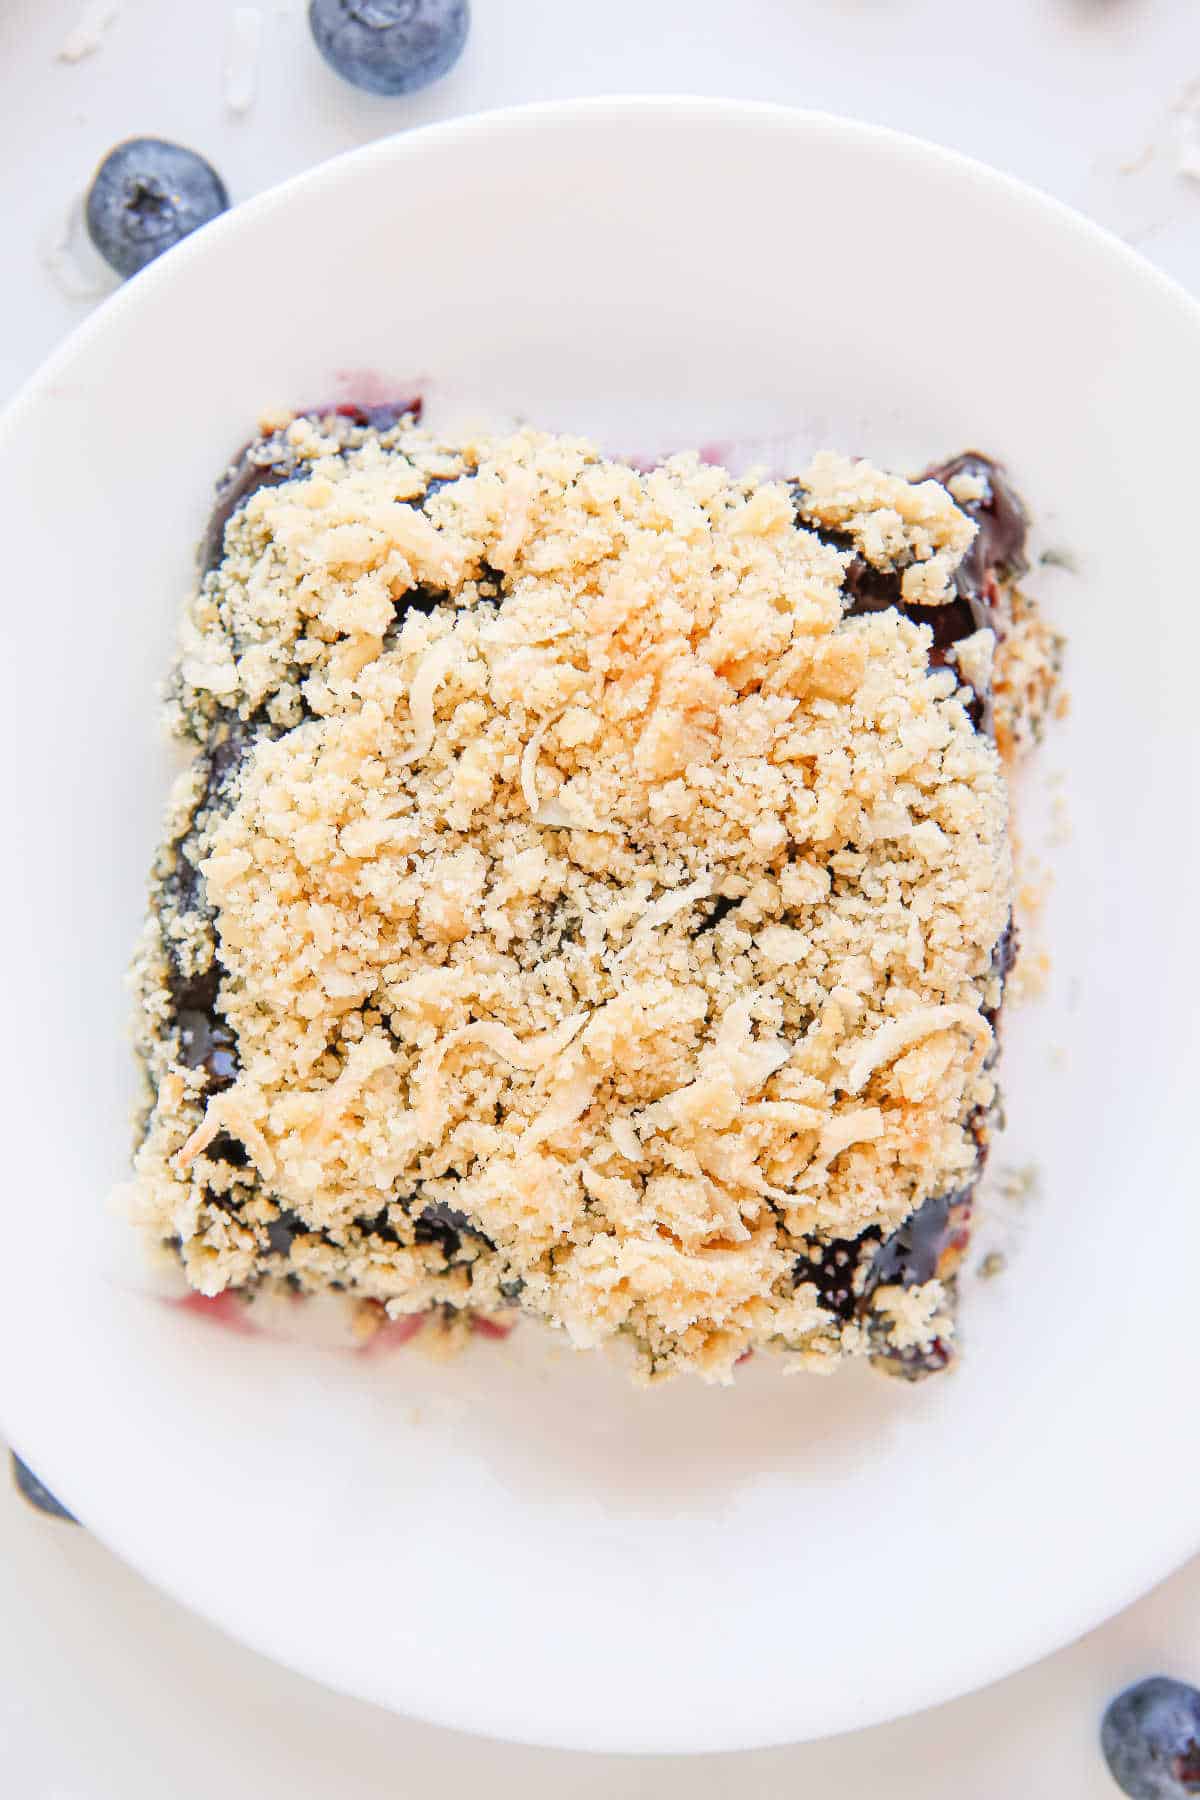 A piece of blueberry crackle cake on a plate.